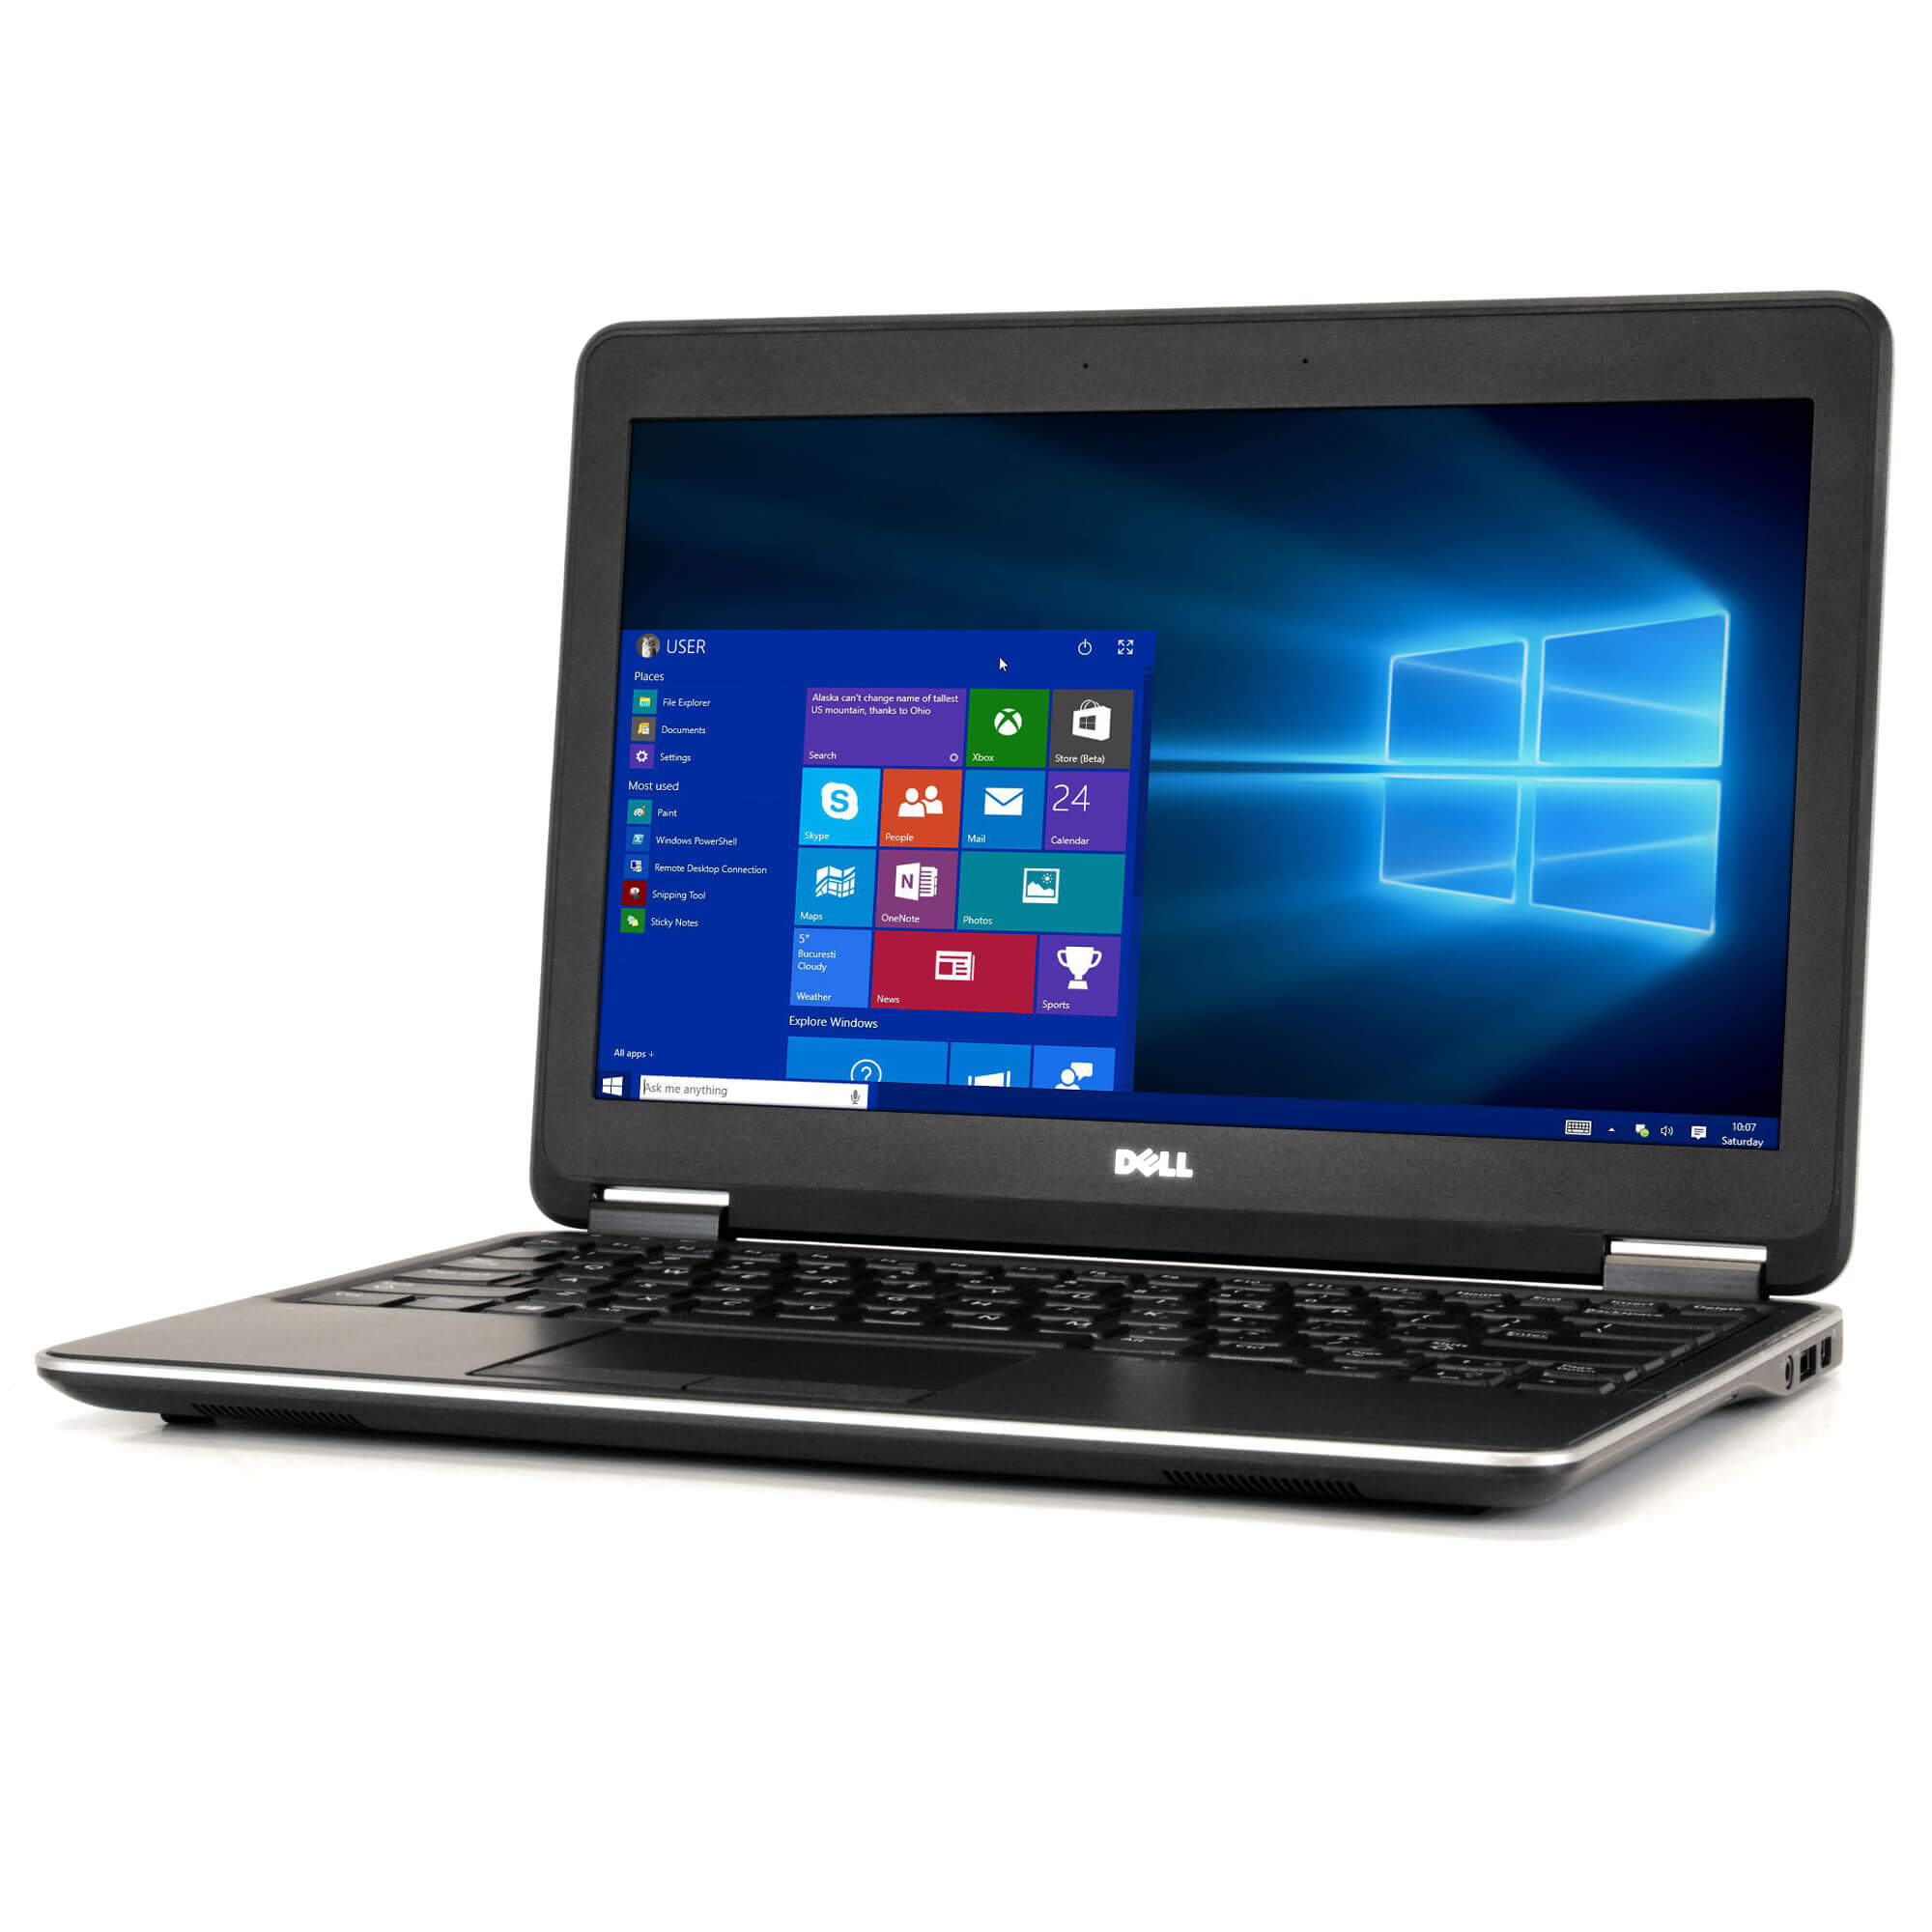 Dell Latitude E7440 Laptop Computer, 1.90 GHz Intel i5 Dual Core Gen 4, 16GB DDR3 RAM, 240GB Solid State Drive (SSD) SSD Hard Drive, Windows 10 Home 64 Bit, 14" Screen Refurbished - image 3 of 9